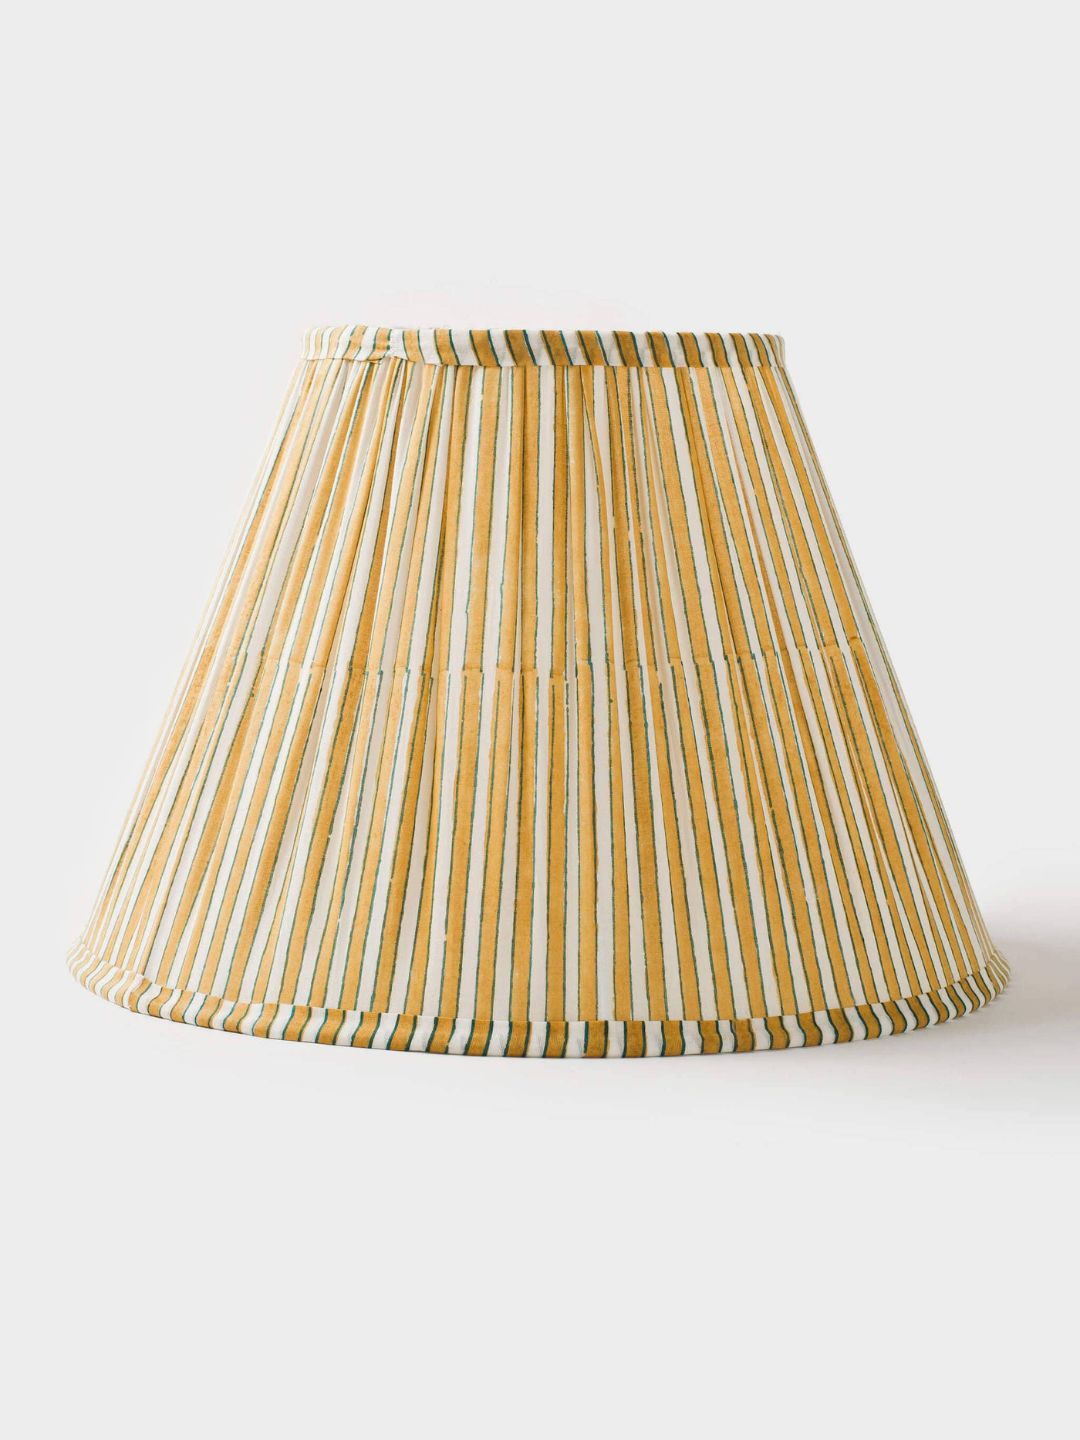 Candy Stripe Pleated Floral Lamp Shade